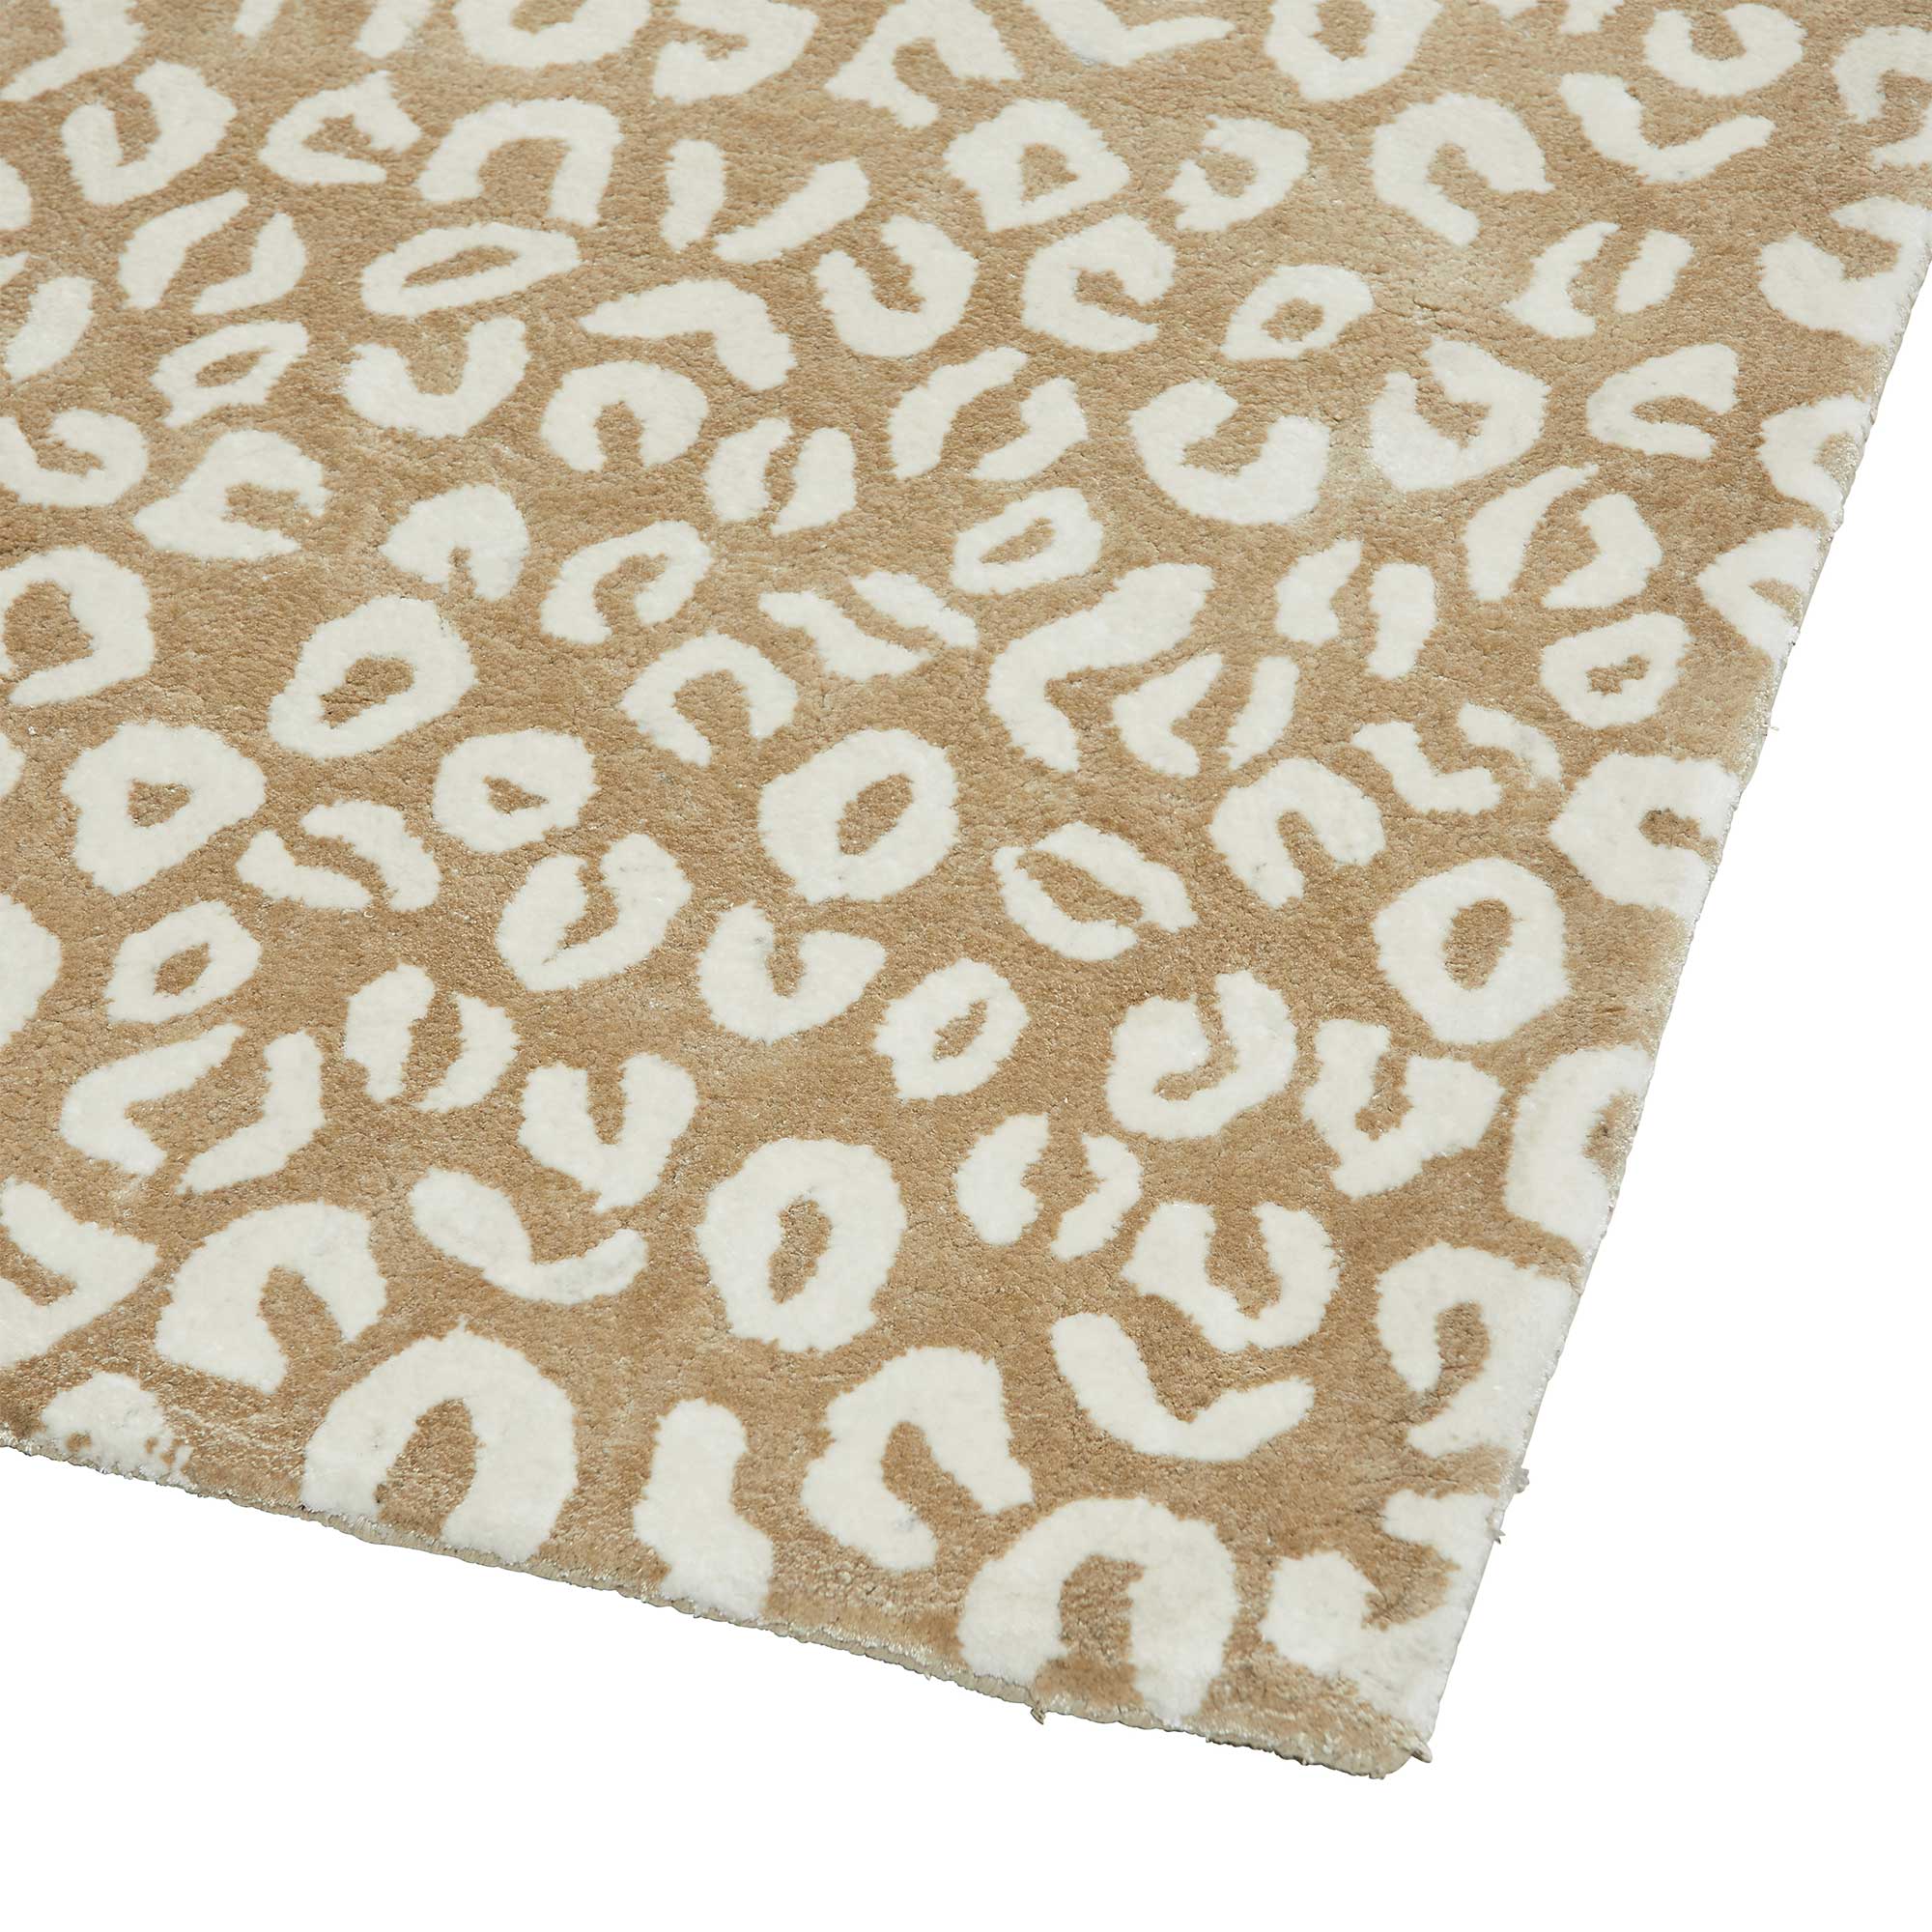 New Leo in Amber Abstract Leopard Rug Sample